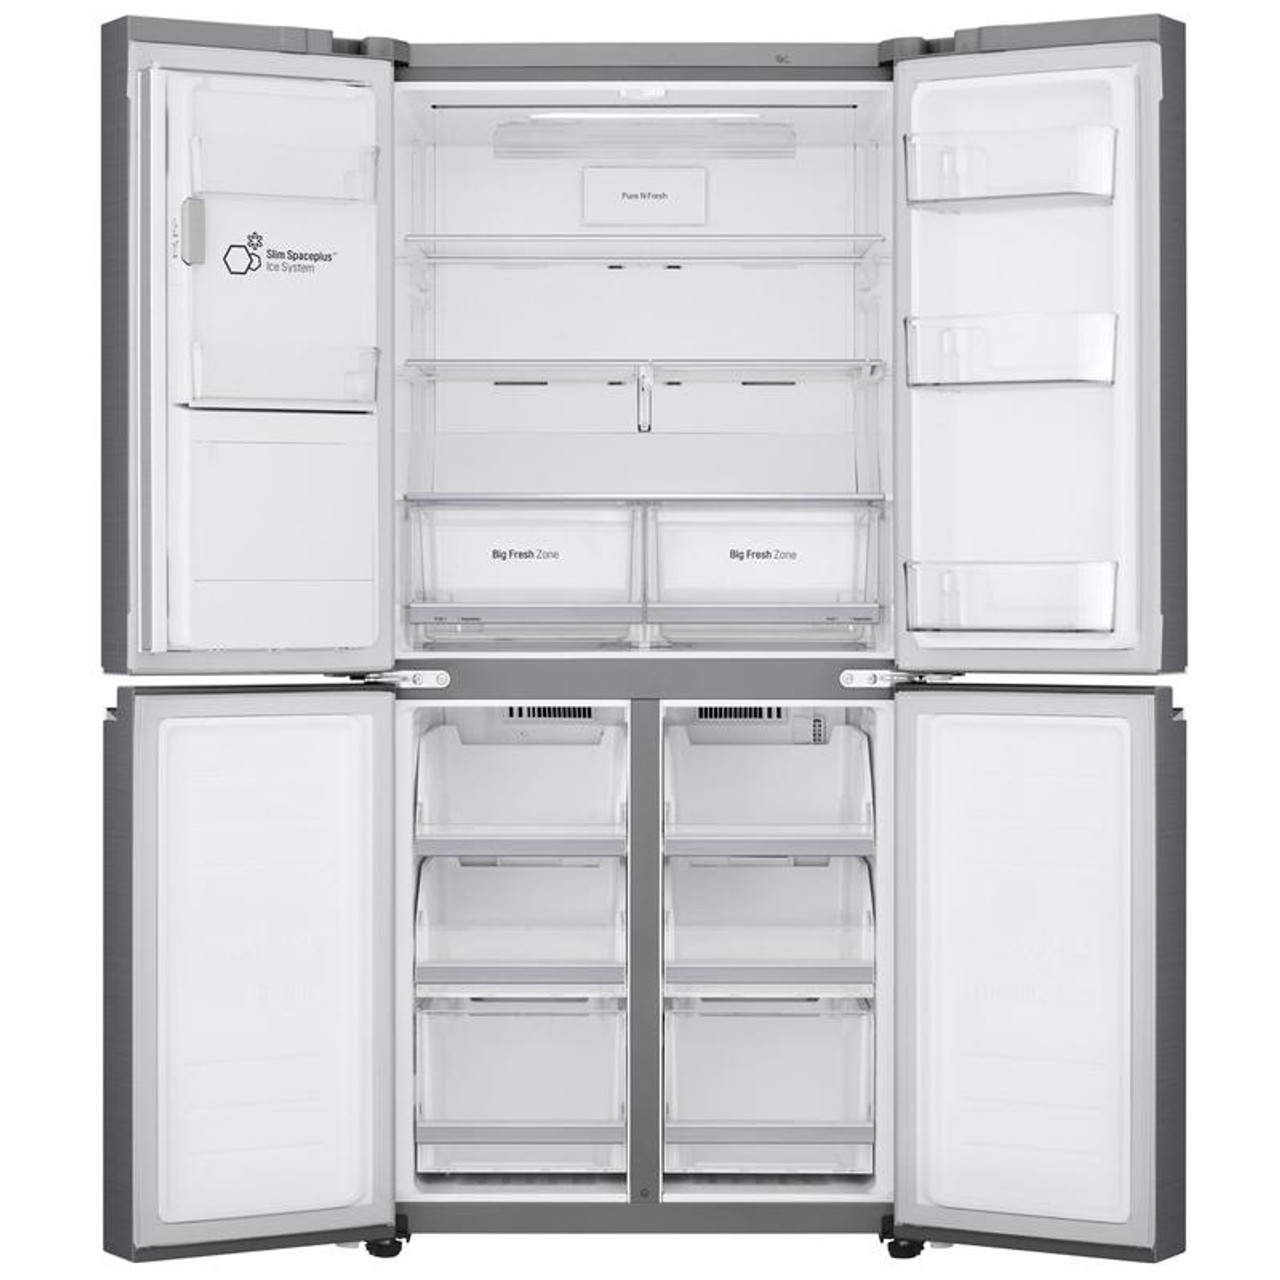 GF-L570PL - 570L Slim French Door Fridge with Ice & Water - Stainless Steel